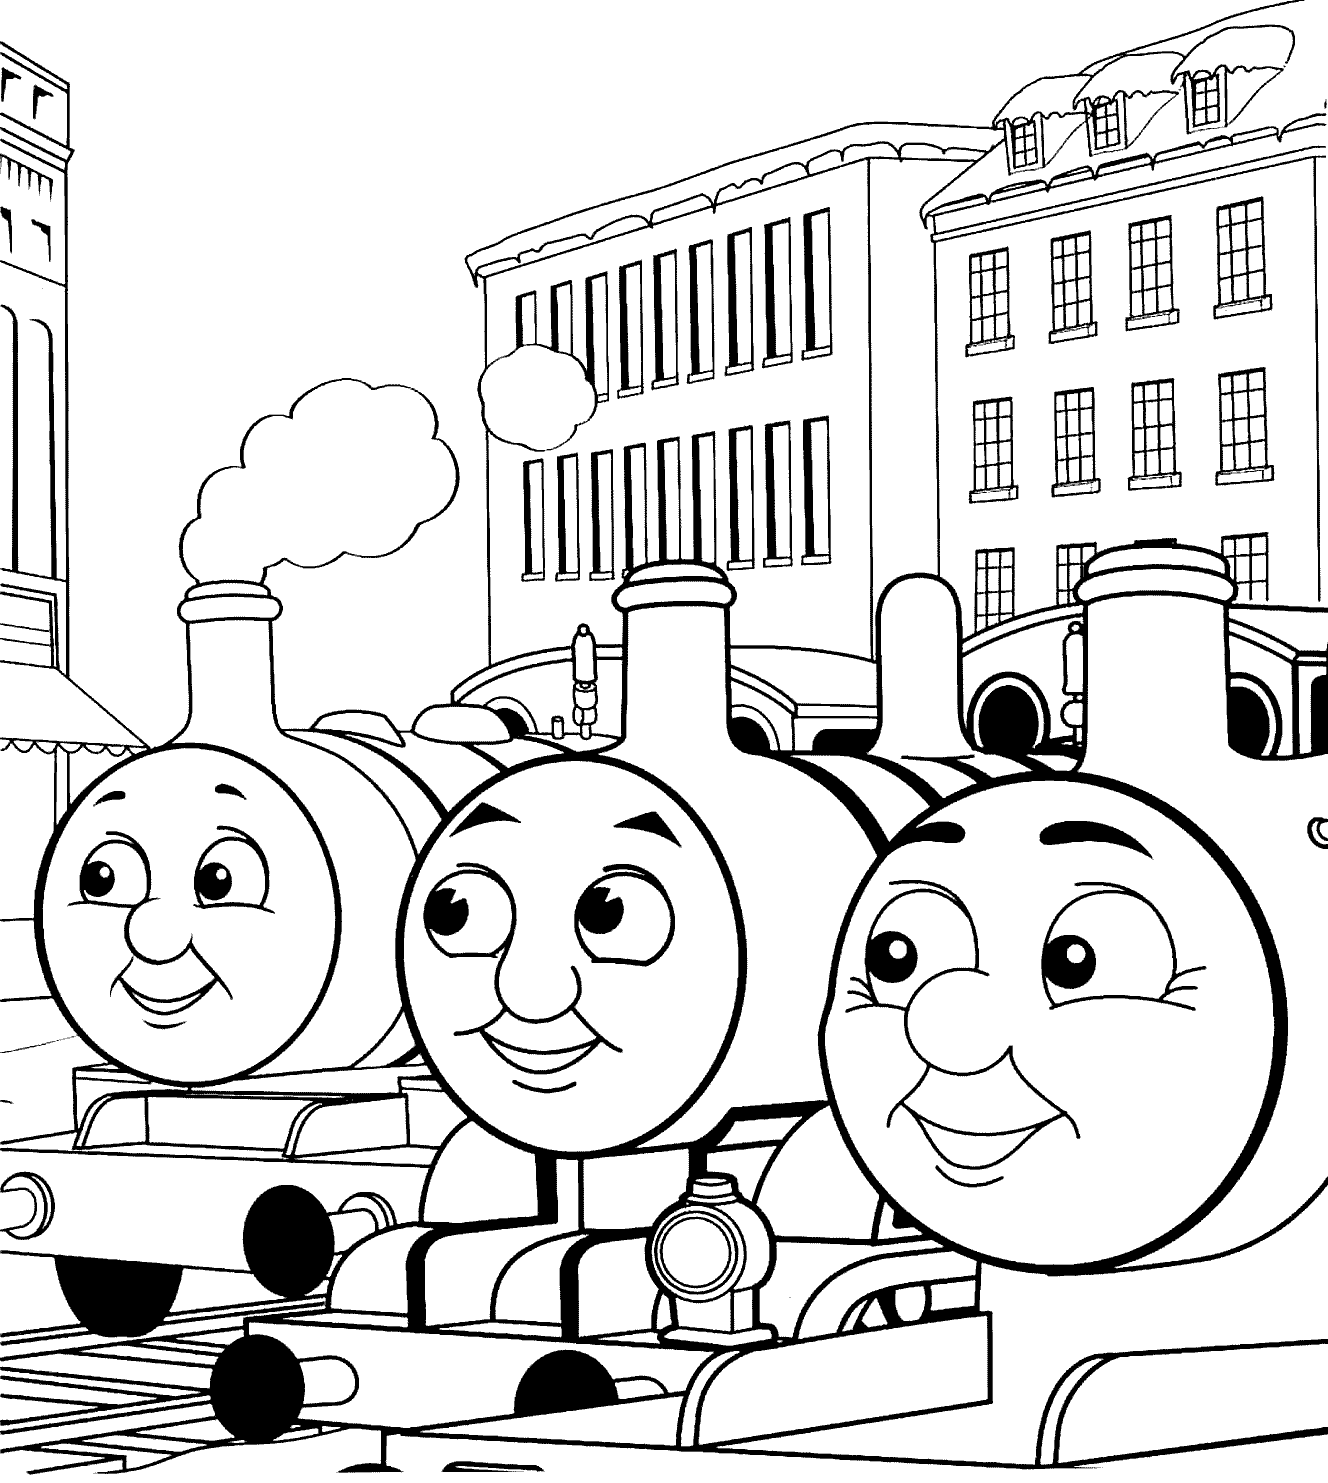 Cartoon Friends Coloring Pages Printable - Coloring Pages For All Ages